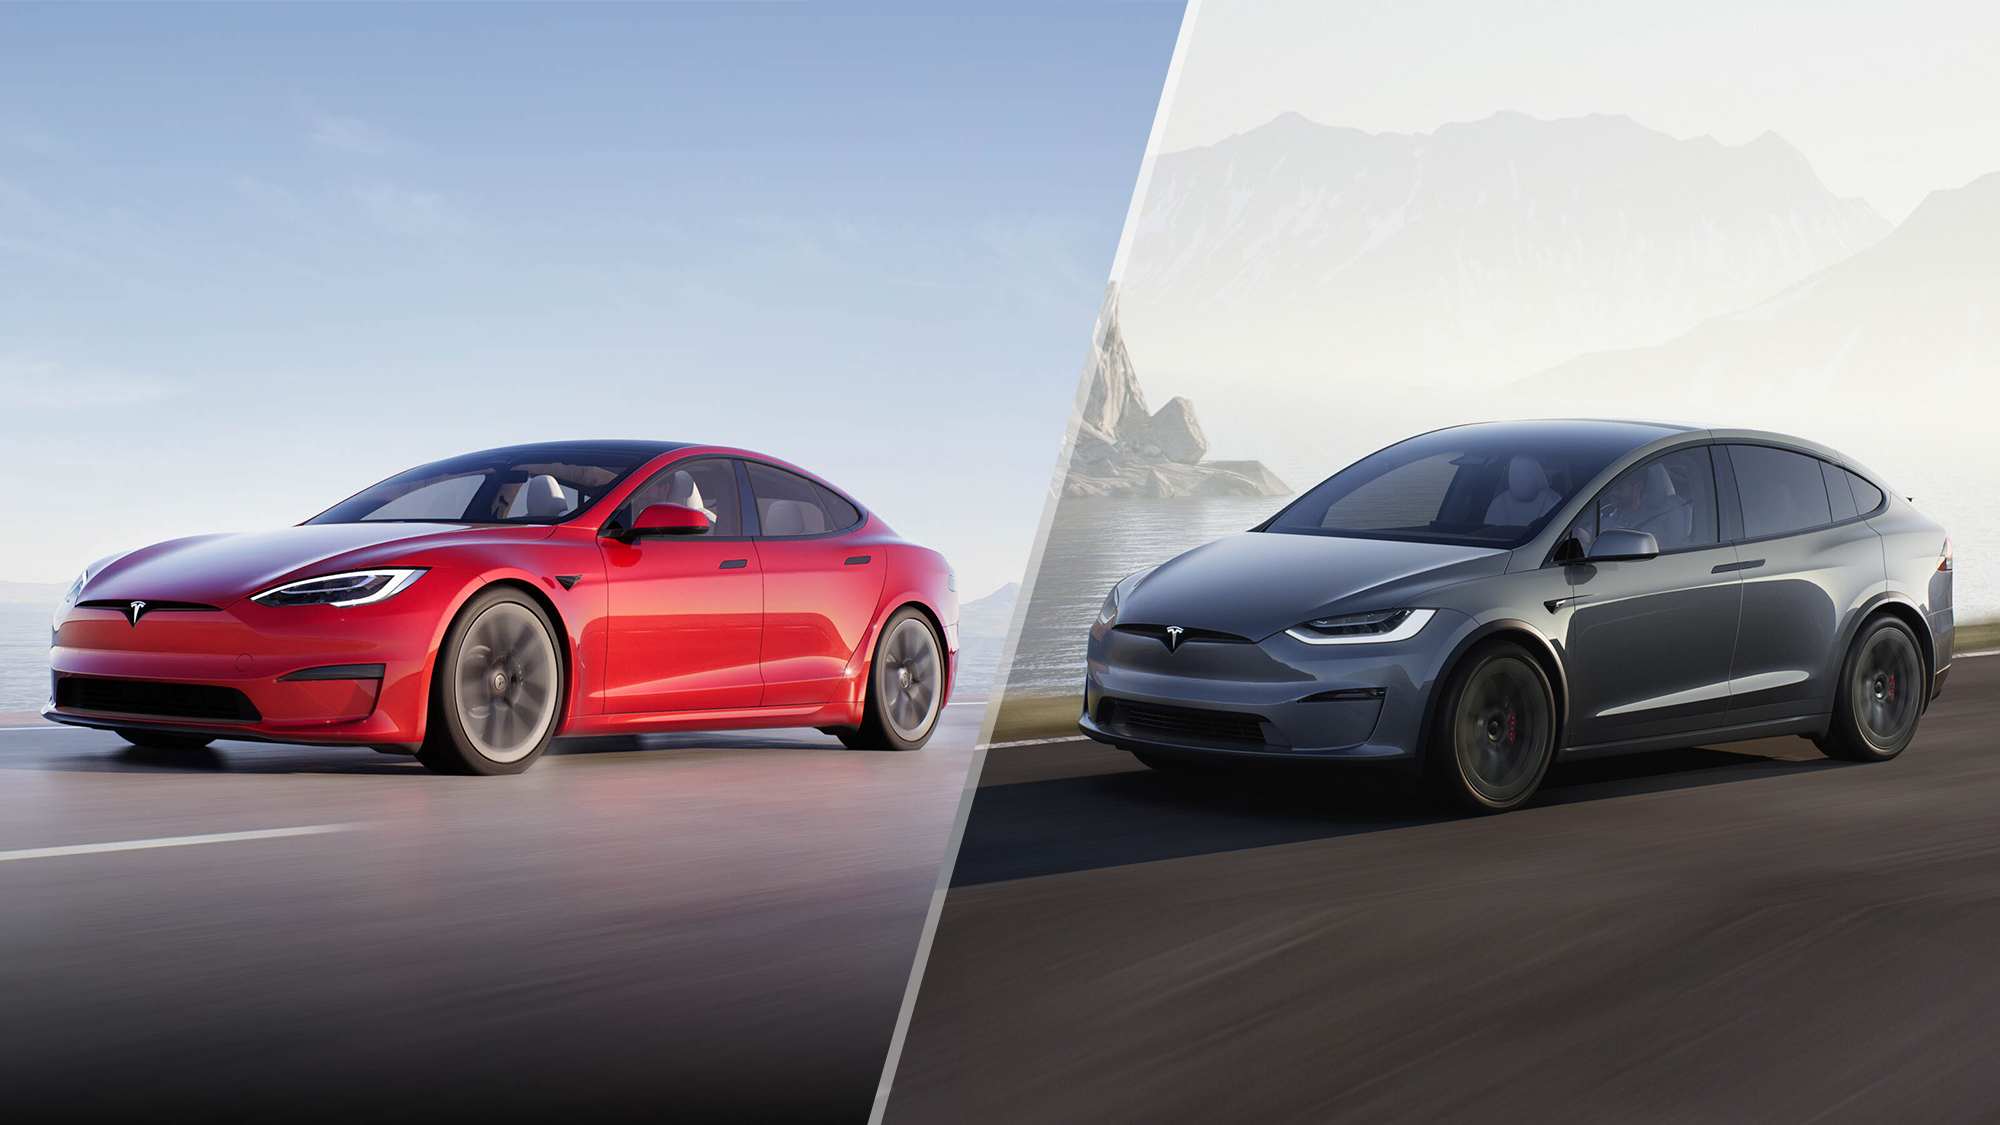 Tesla Model S vs Tesla Model X: What's the difference?